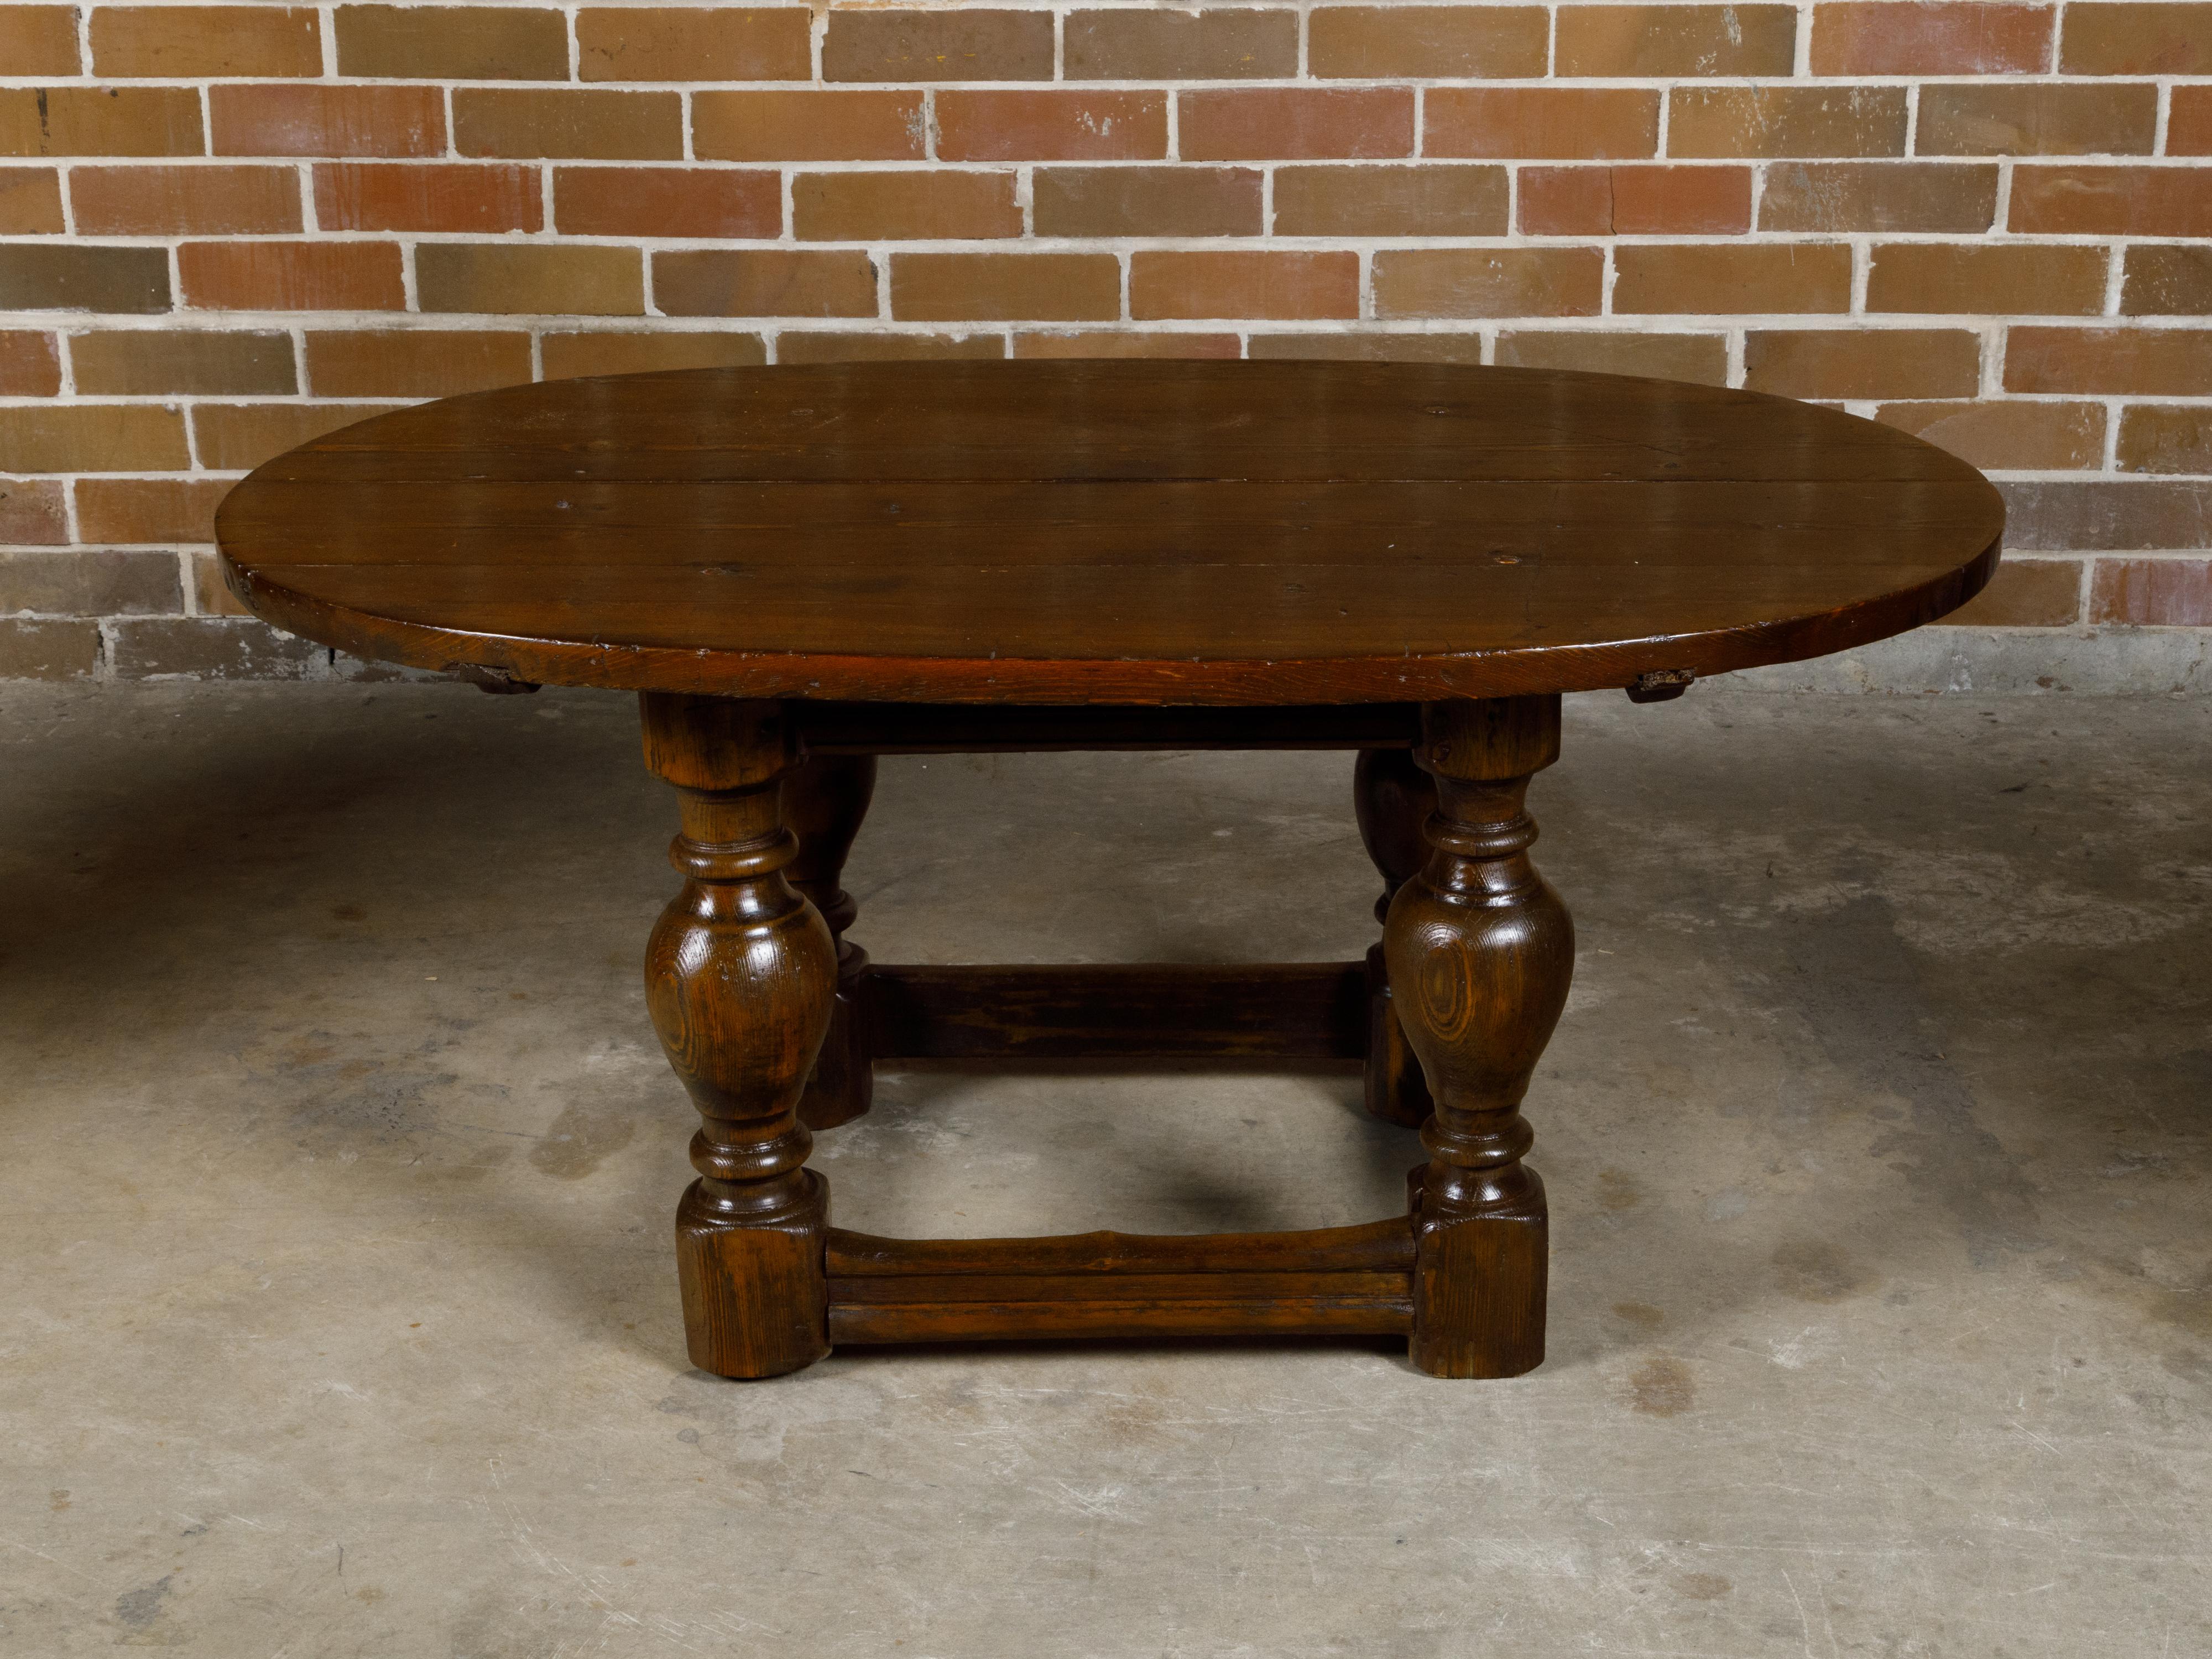 18th Century Georgian English Pine Table with Oval Top and Turned Legs For Sale 6